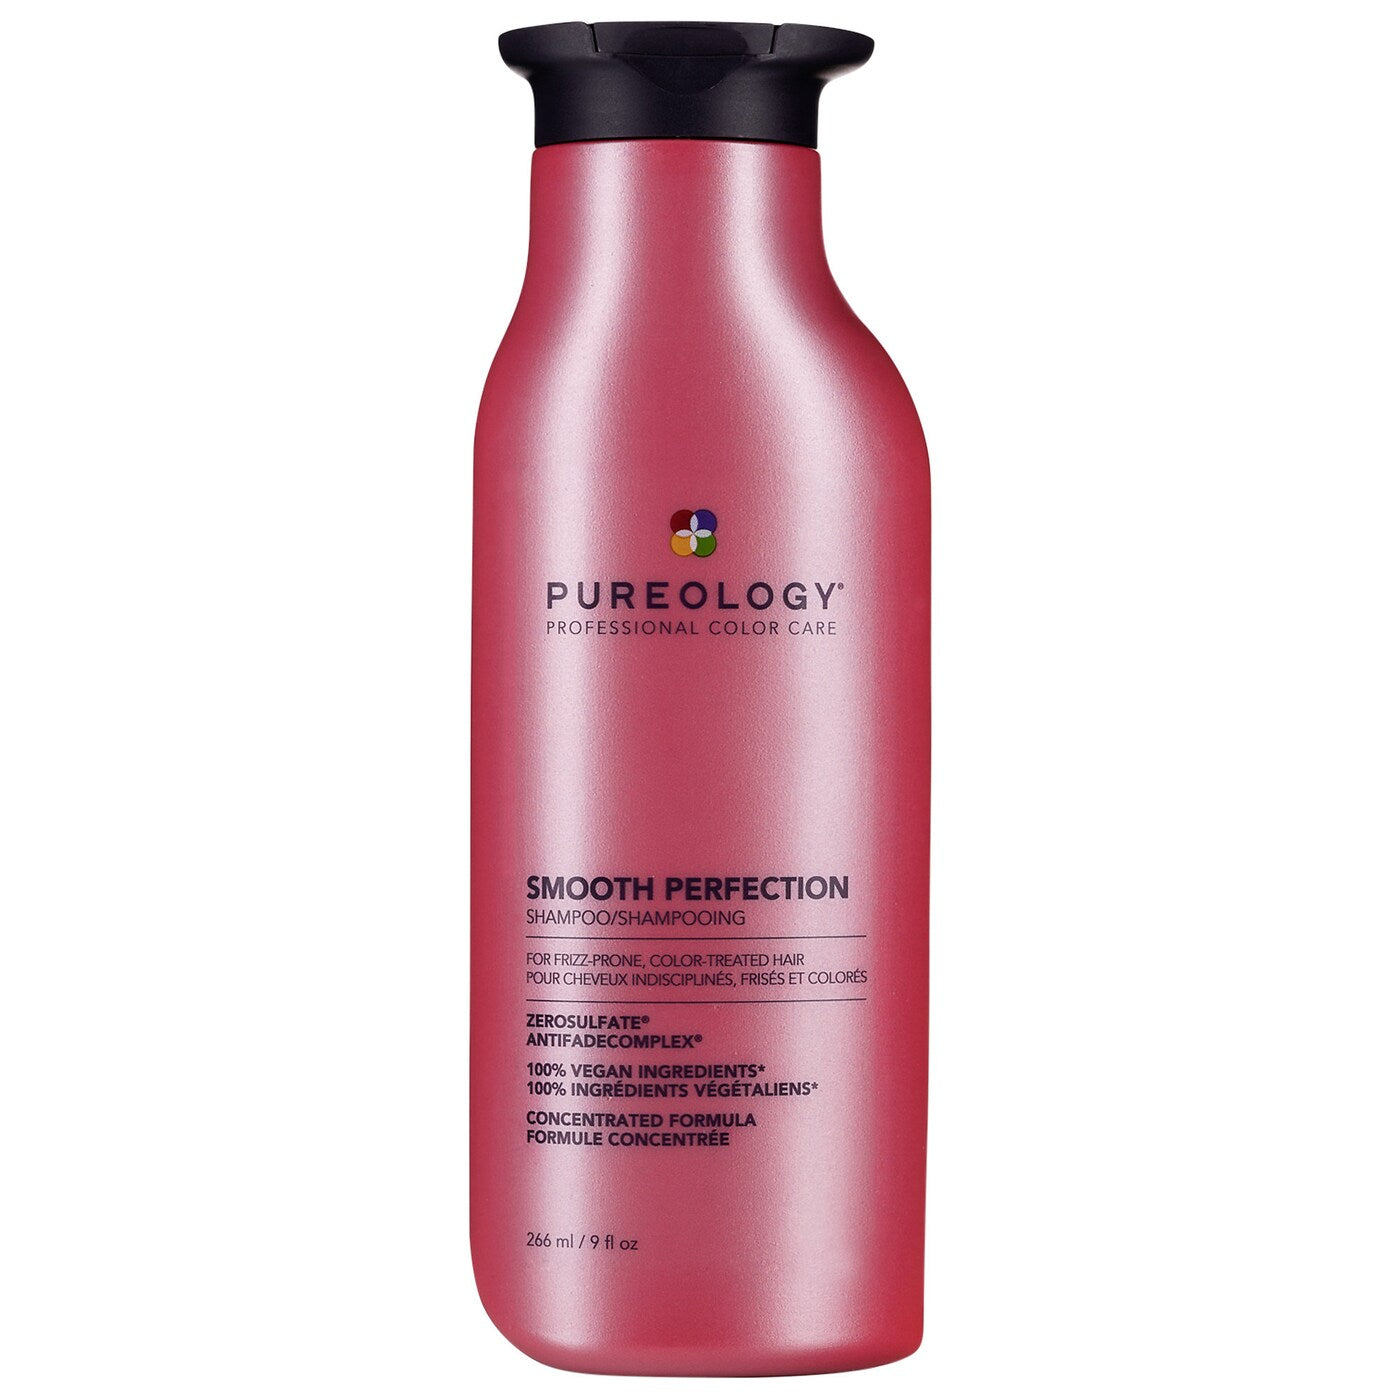 Smooth perfection Shampoing - 266mL